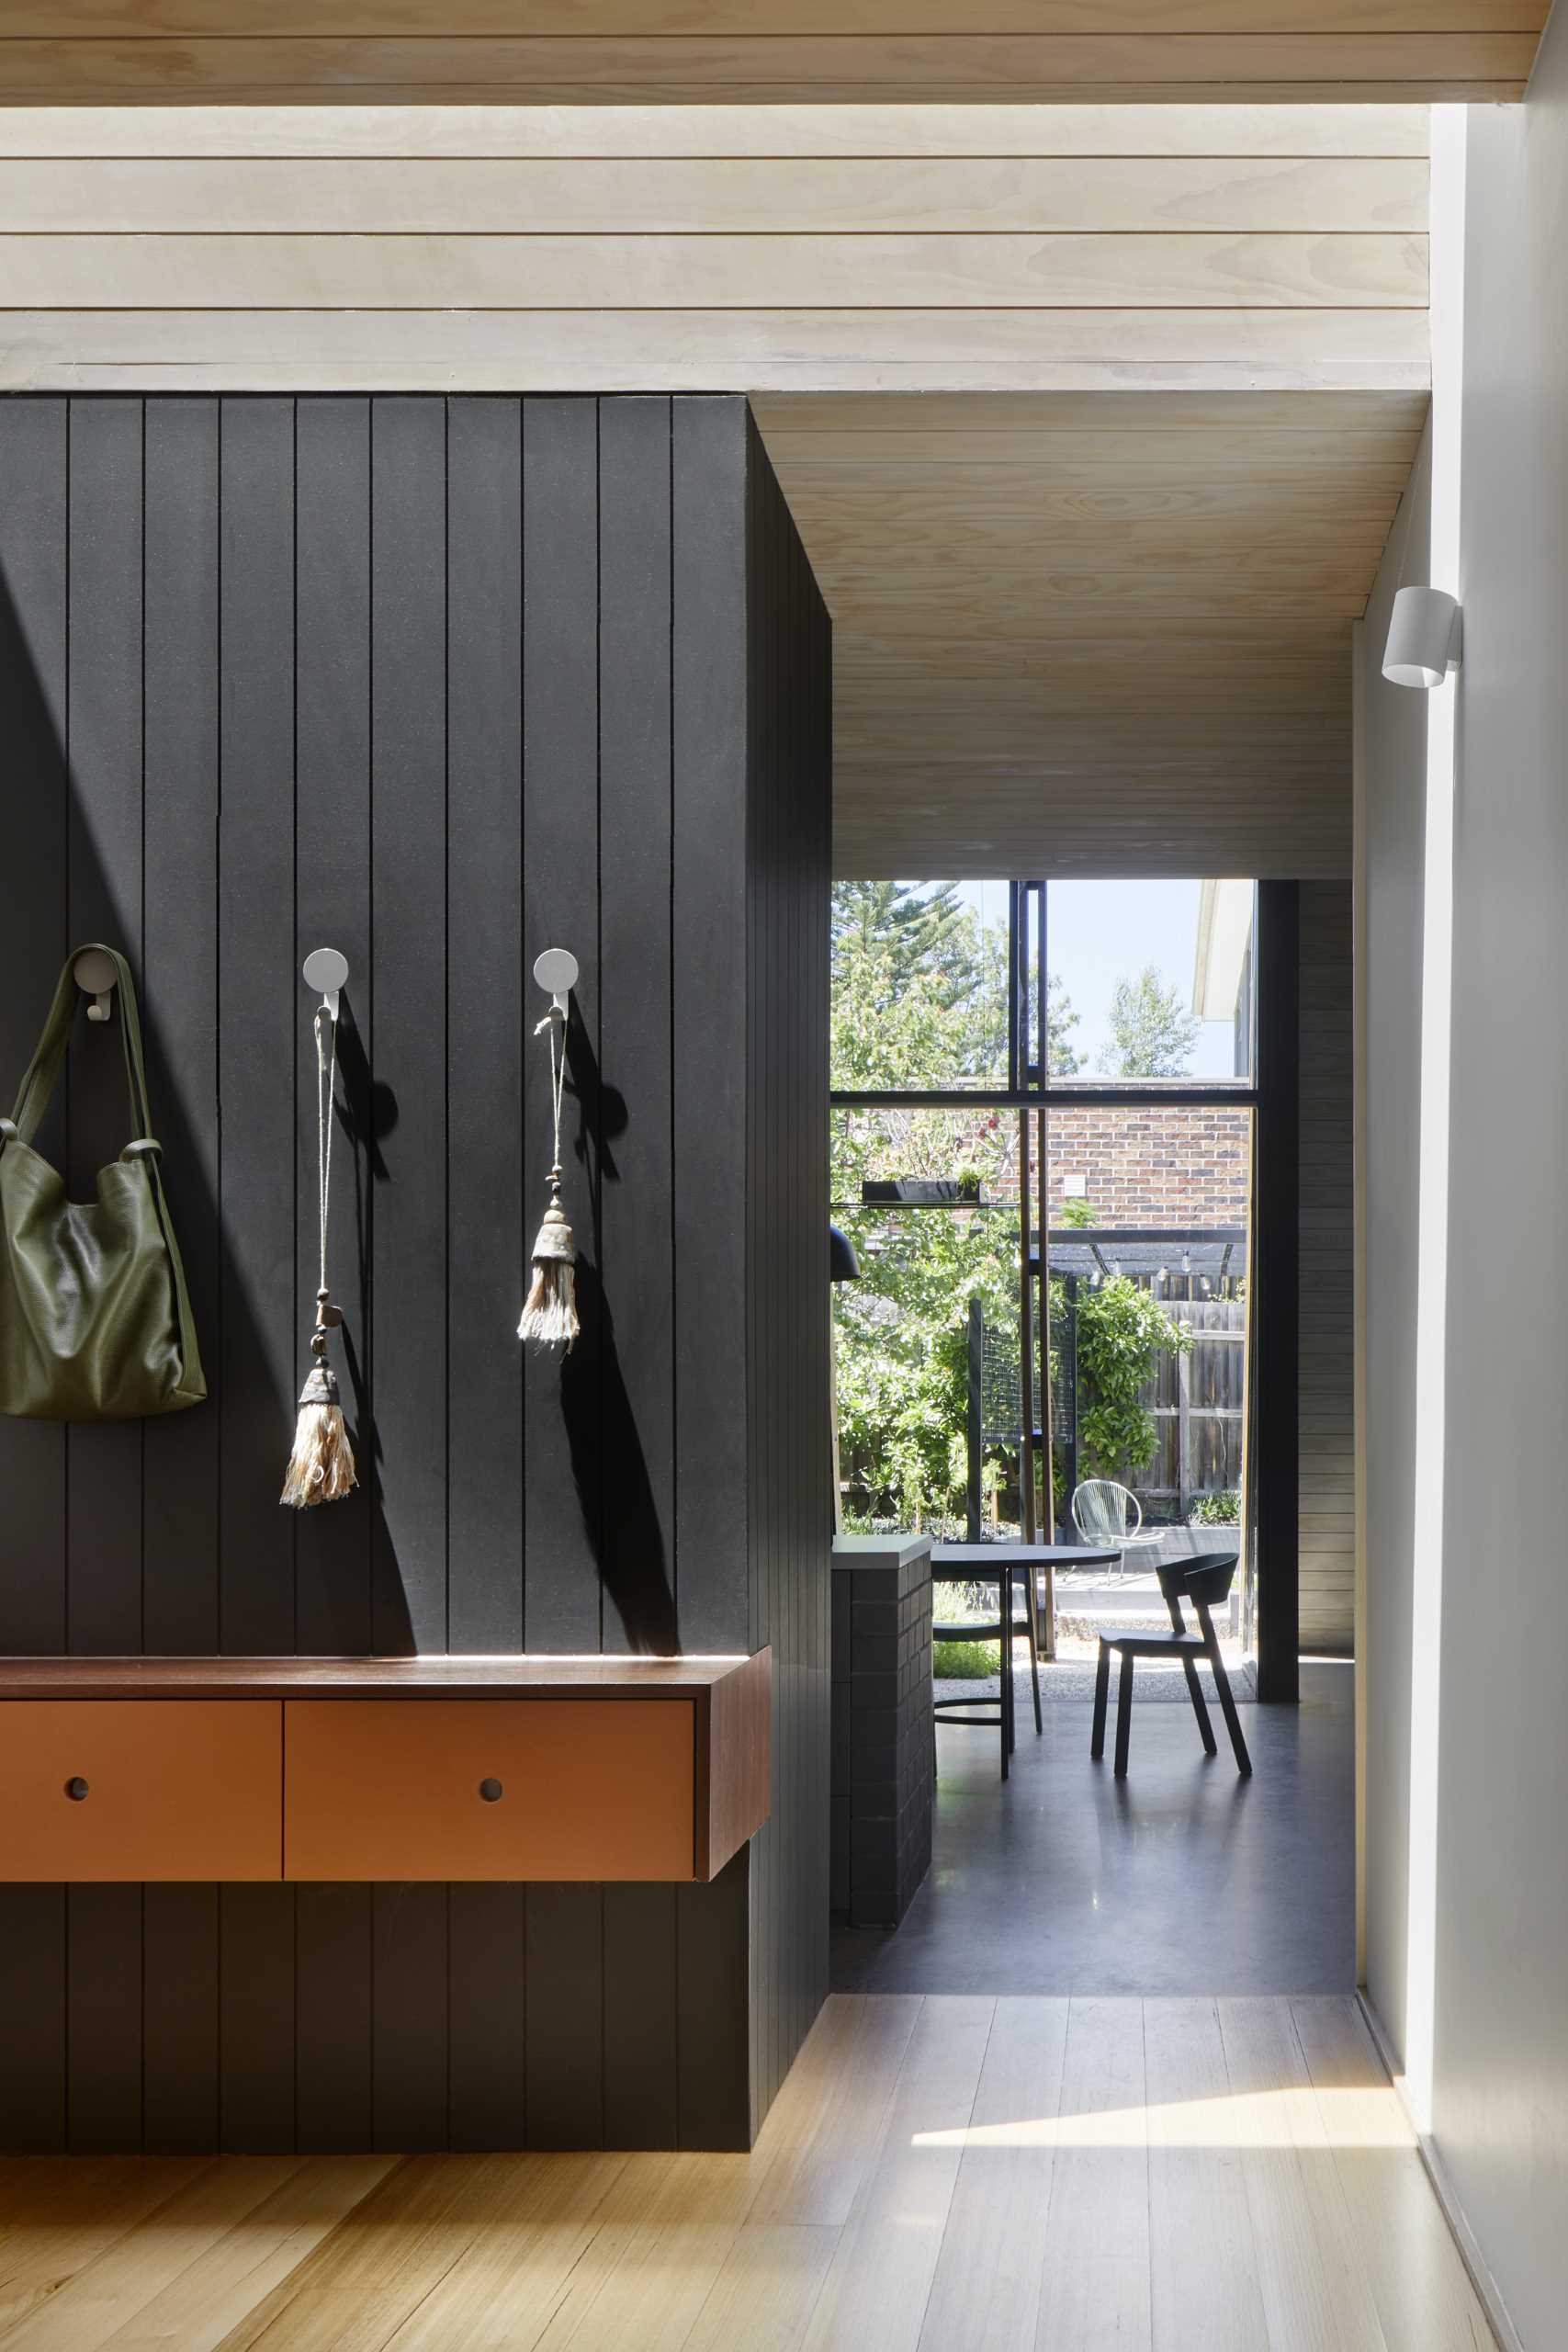 In an open area near the entrance to the home extension includes a floating console with hooks and shelving.